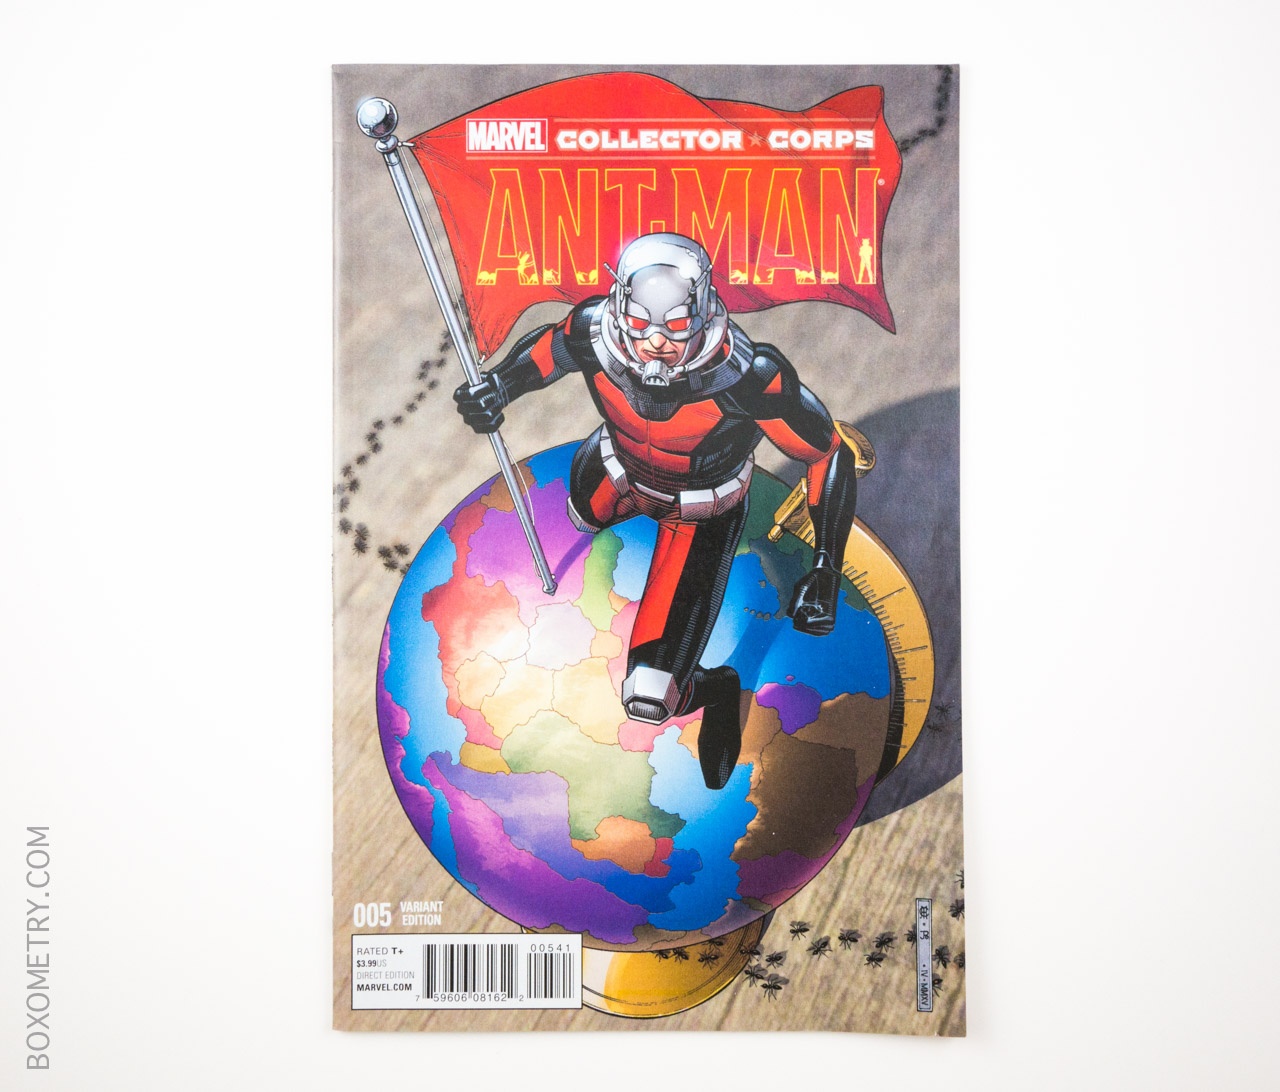 Boxometry Marvel Collector Corps June 2015 Review - Ant-Man 005 Exclusive Variant Edition